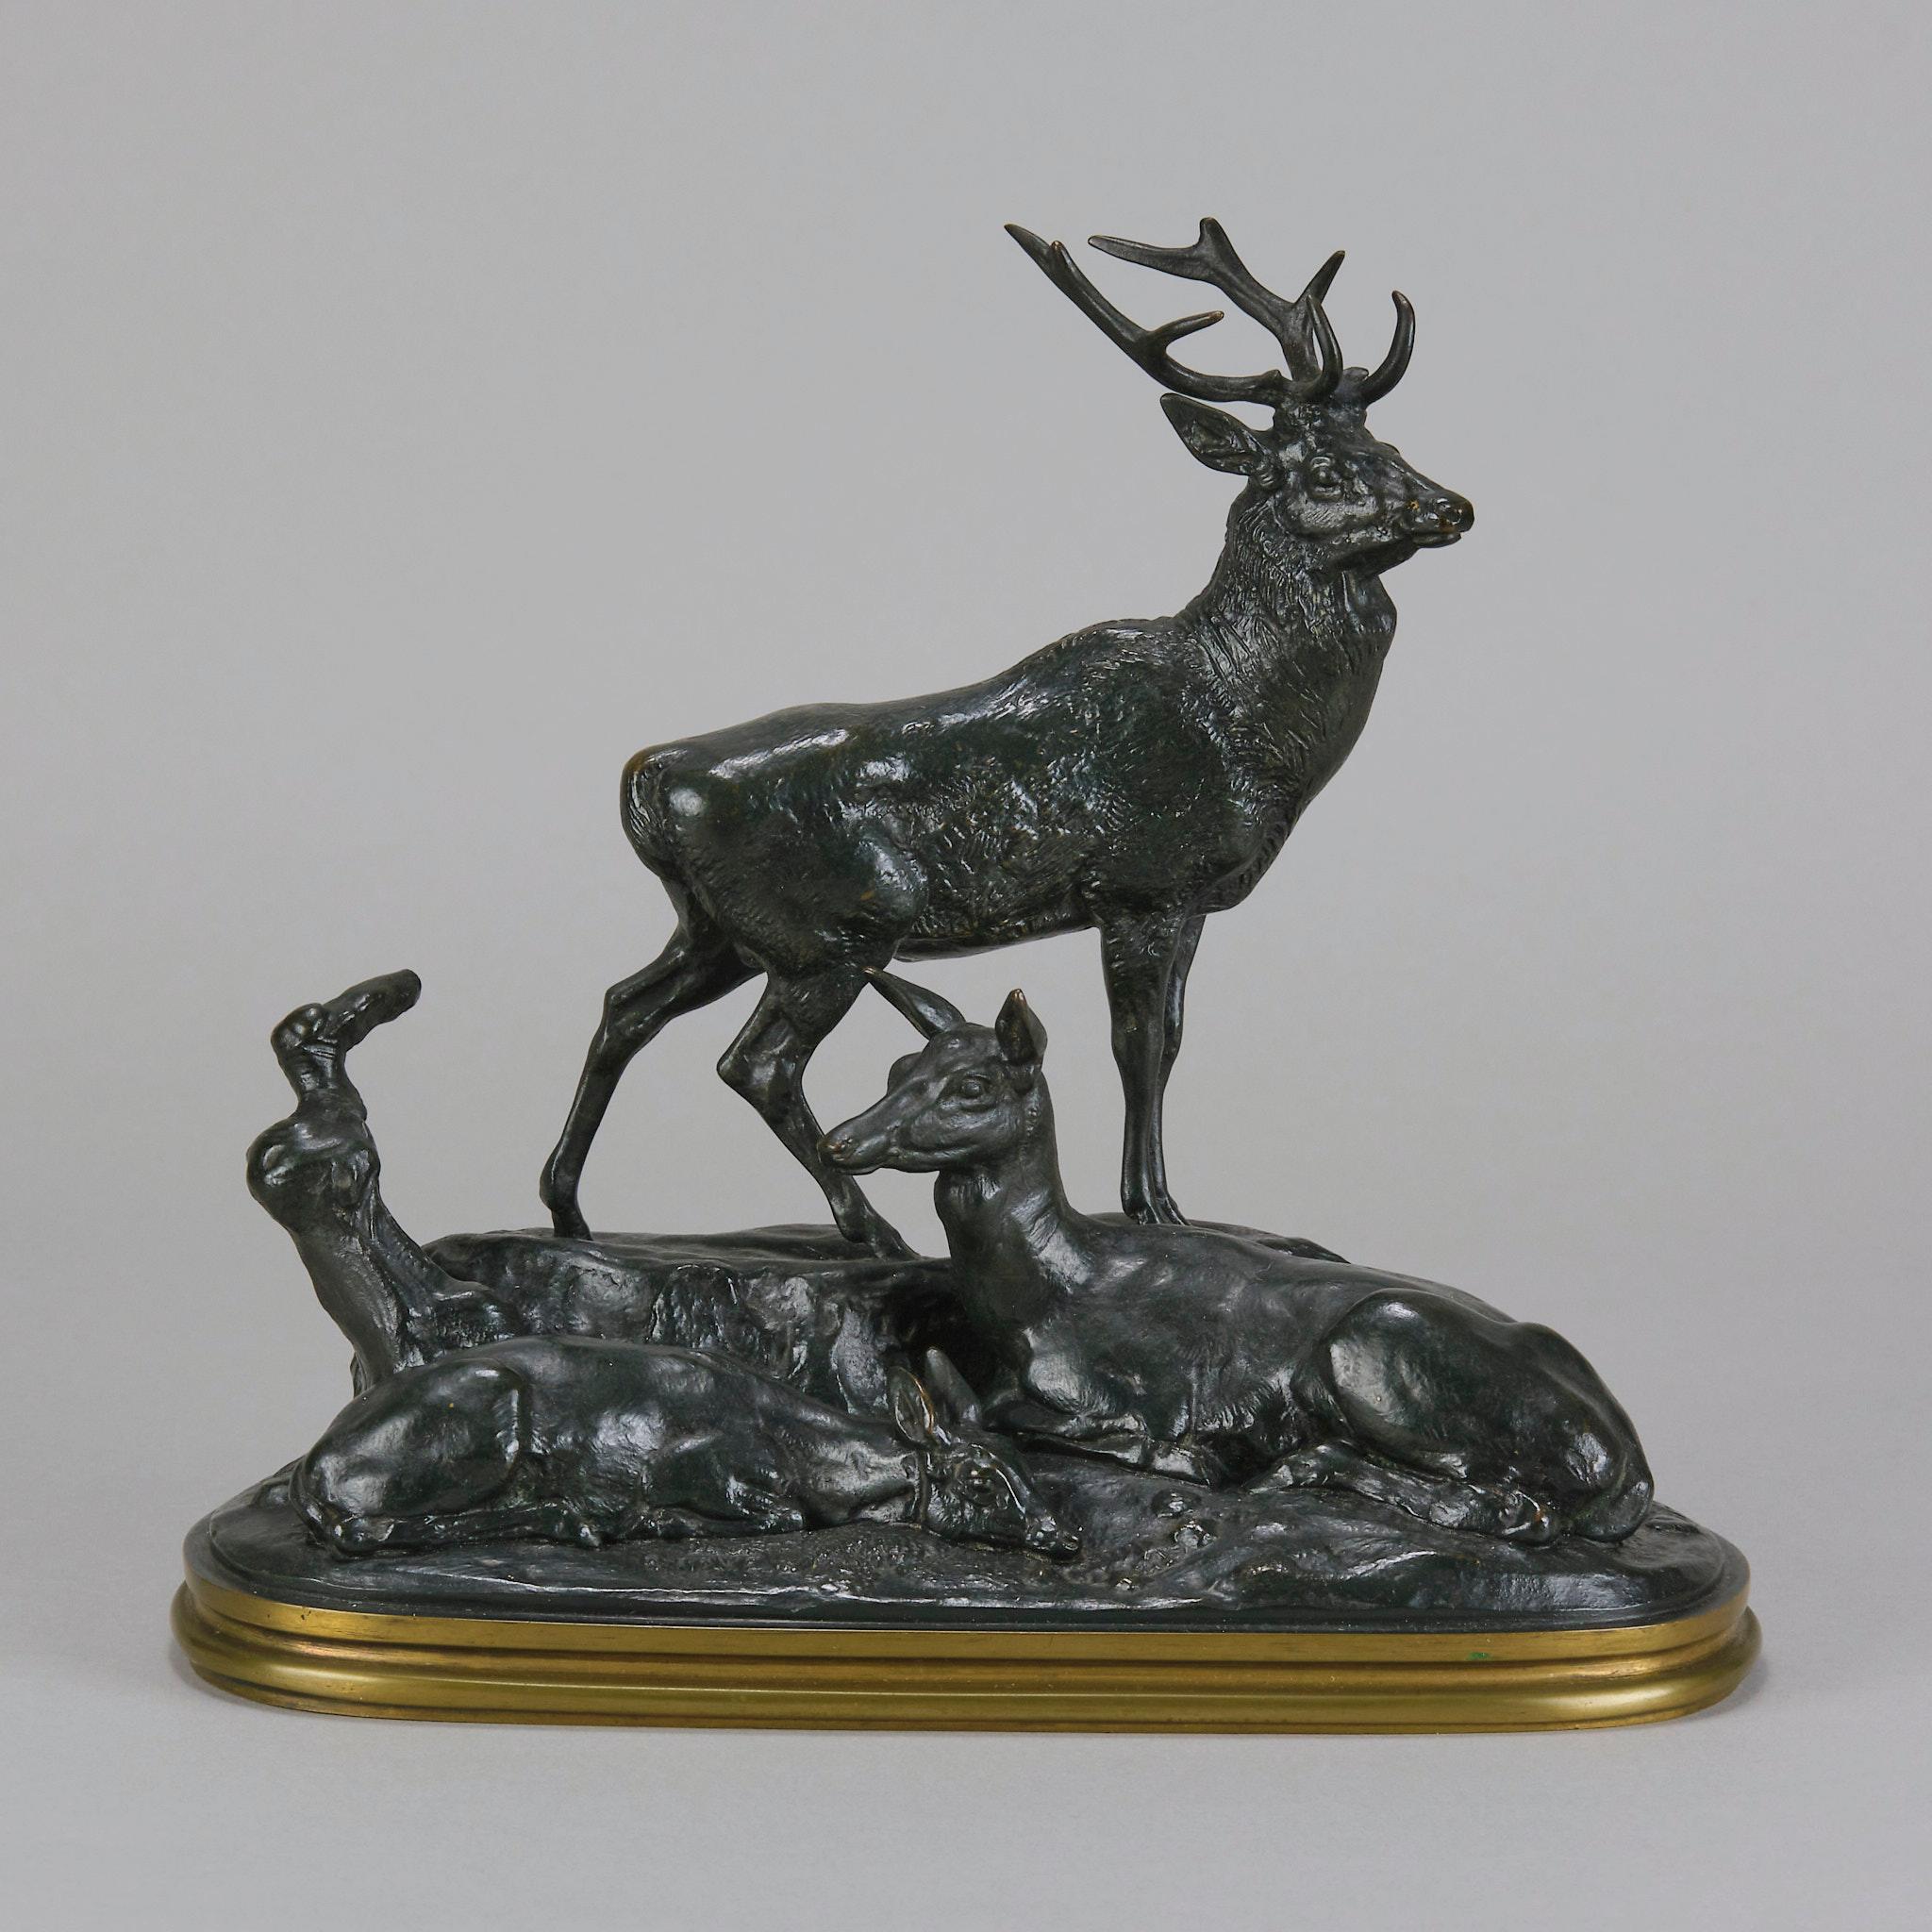 A delightful late 19th century animalier bronze group of a family of resting deer including alert Stag and resting Doe & Faun. The subject modelled with wonderful intuition and skill. The surface has a rich green patination and excellent hand chased